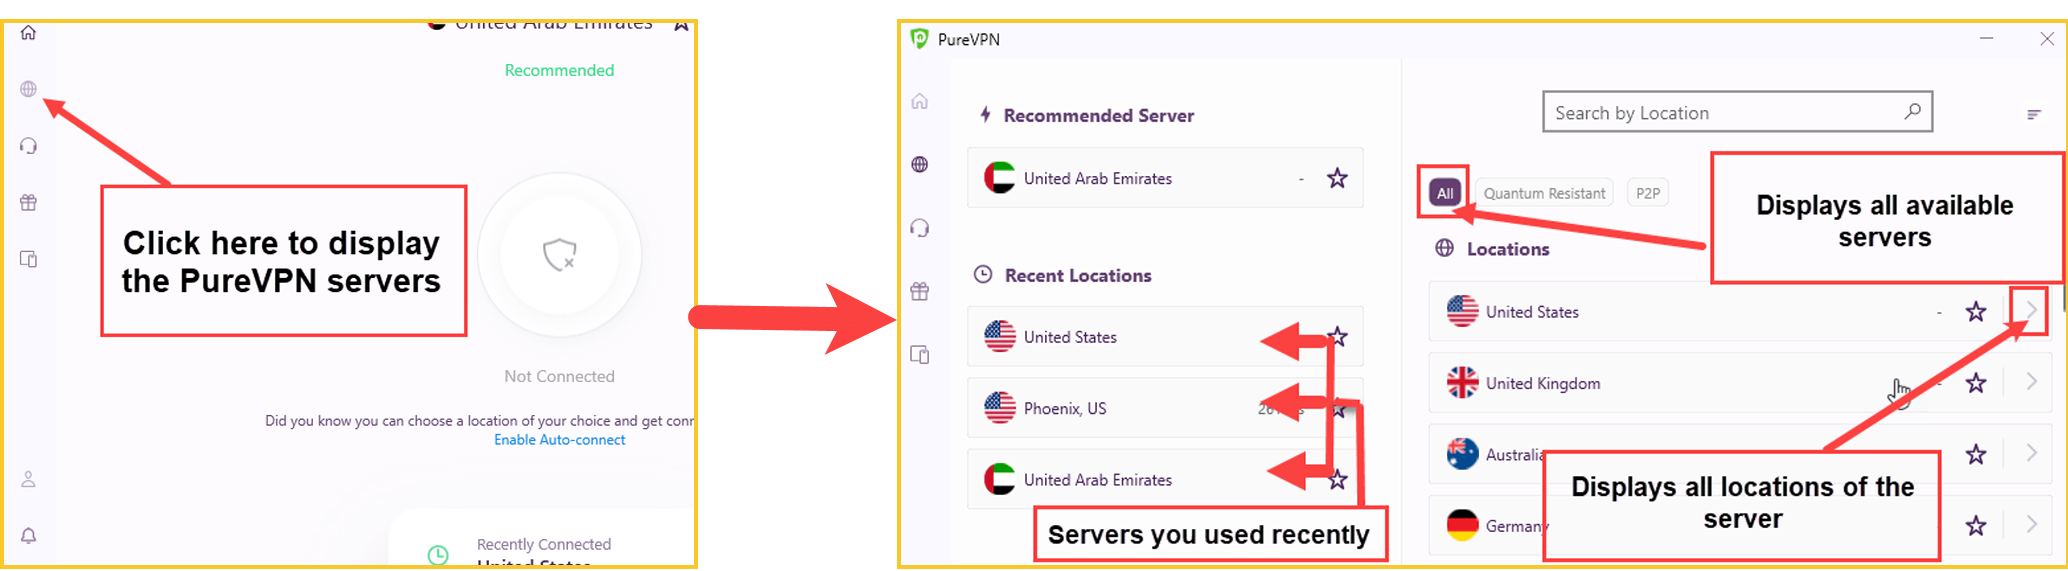 purevpn-server-locations-interface-in-Italy